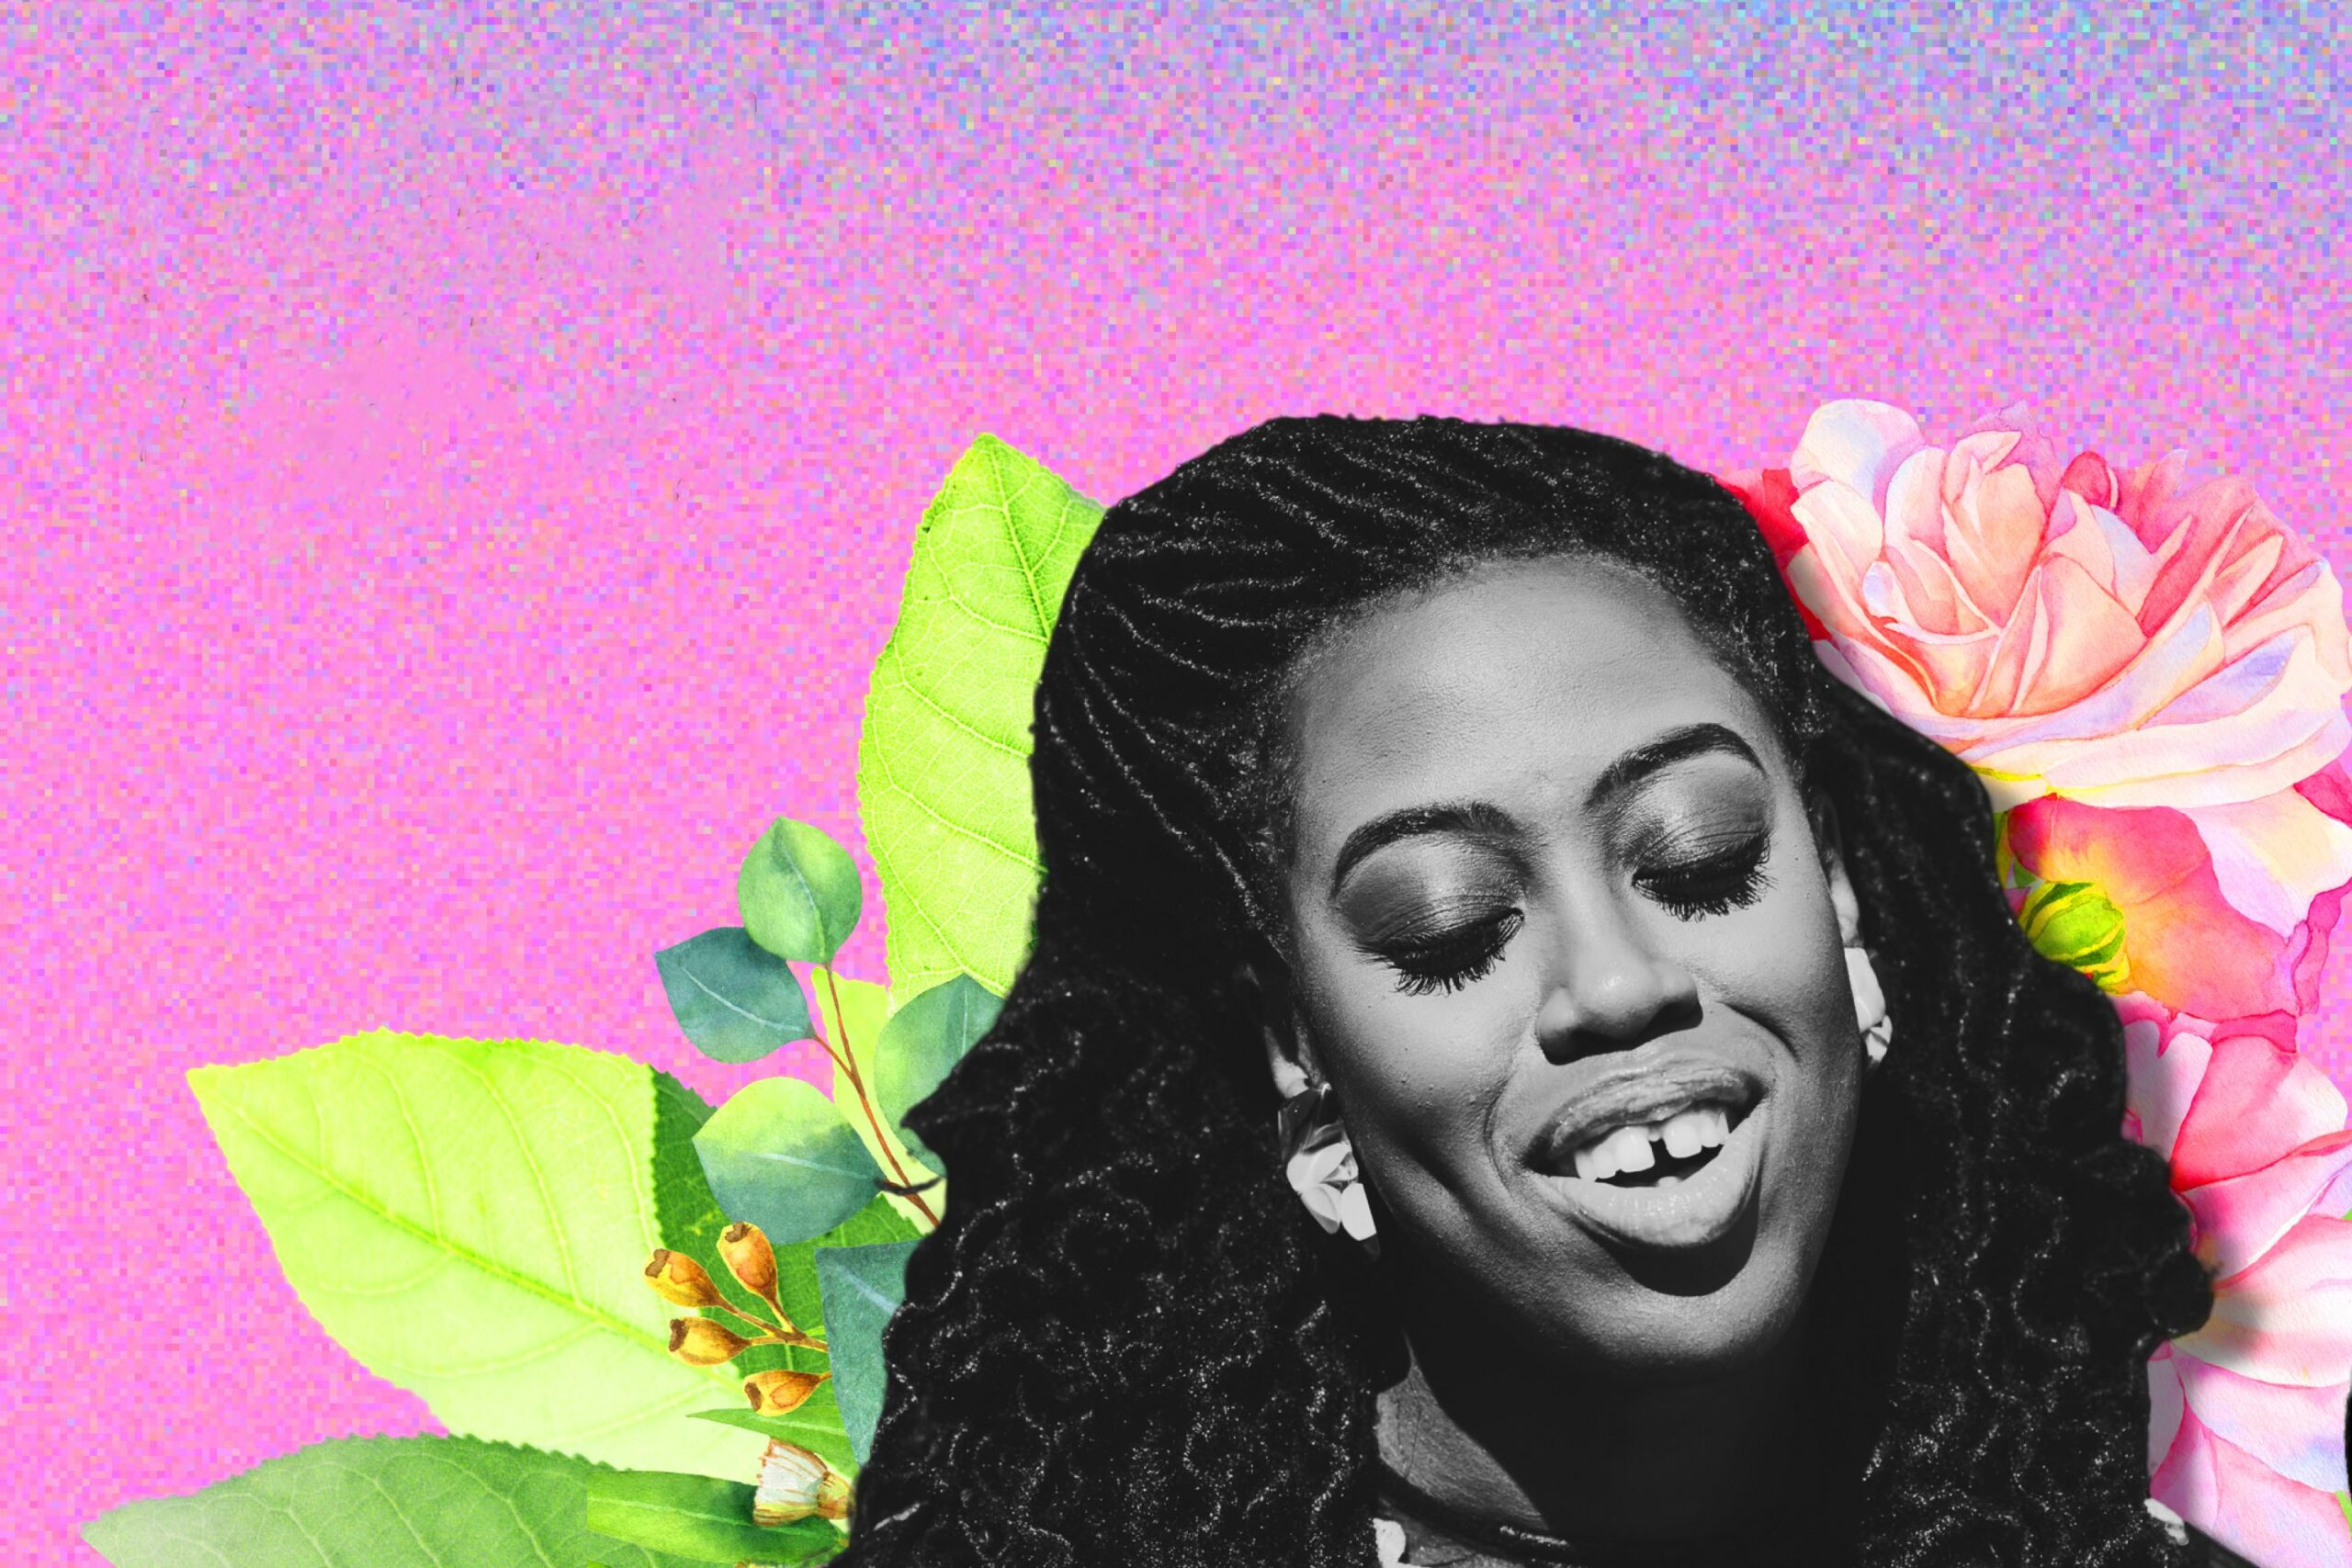 A black woman smiling with a gap in her front tooth set against a background of virtual flowers and pink